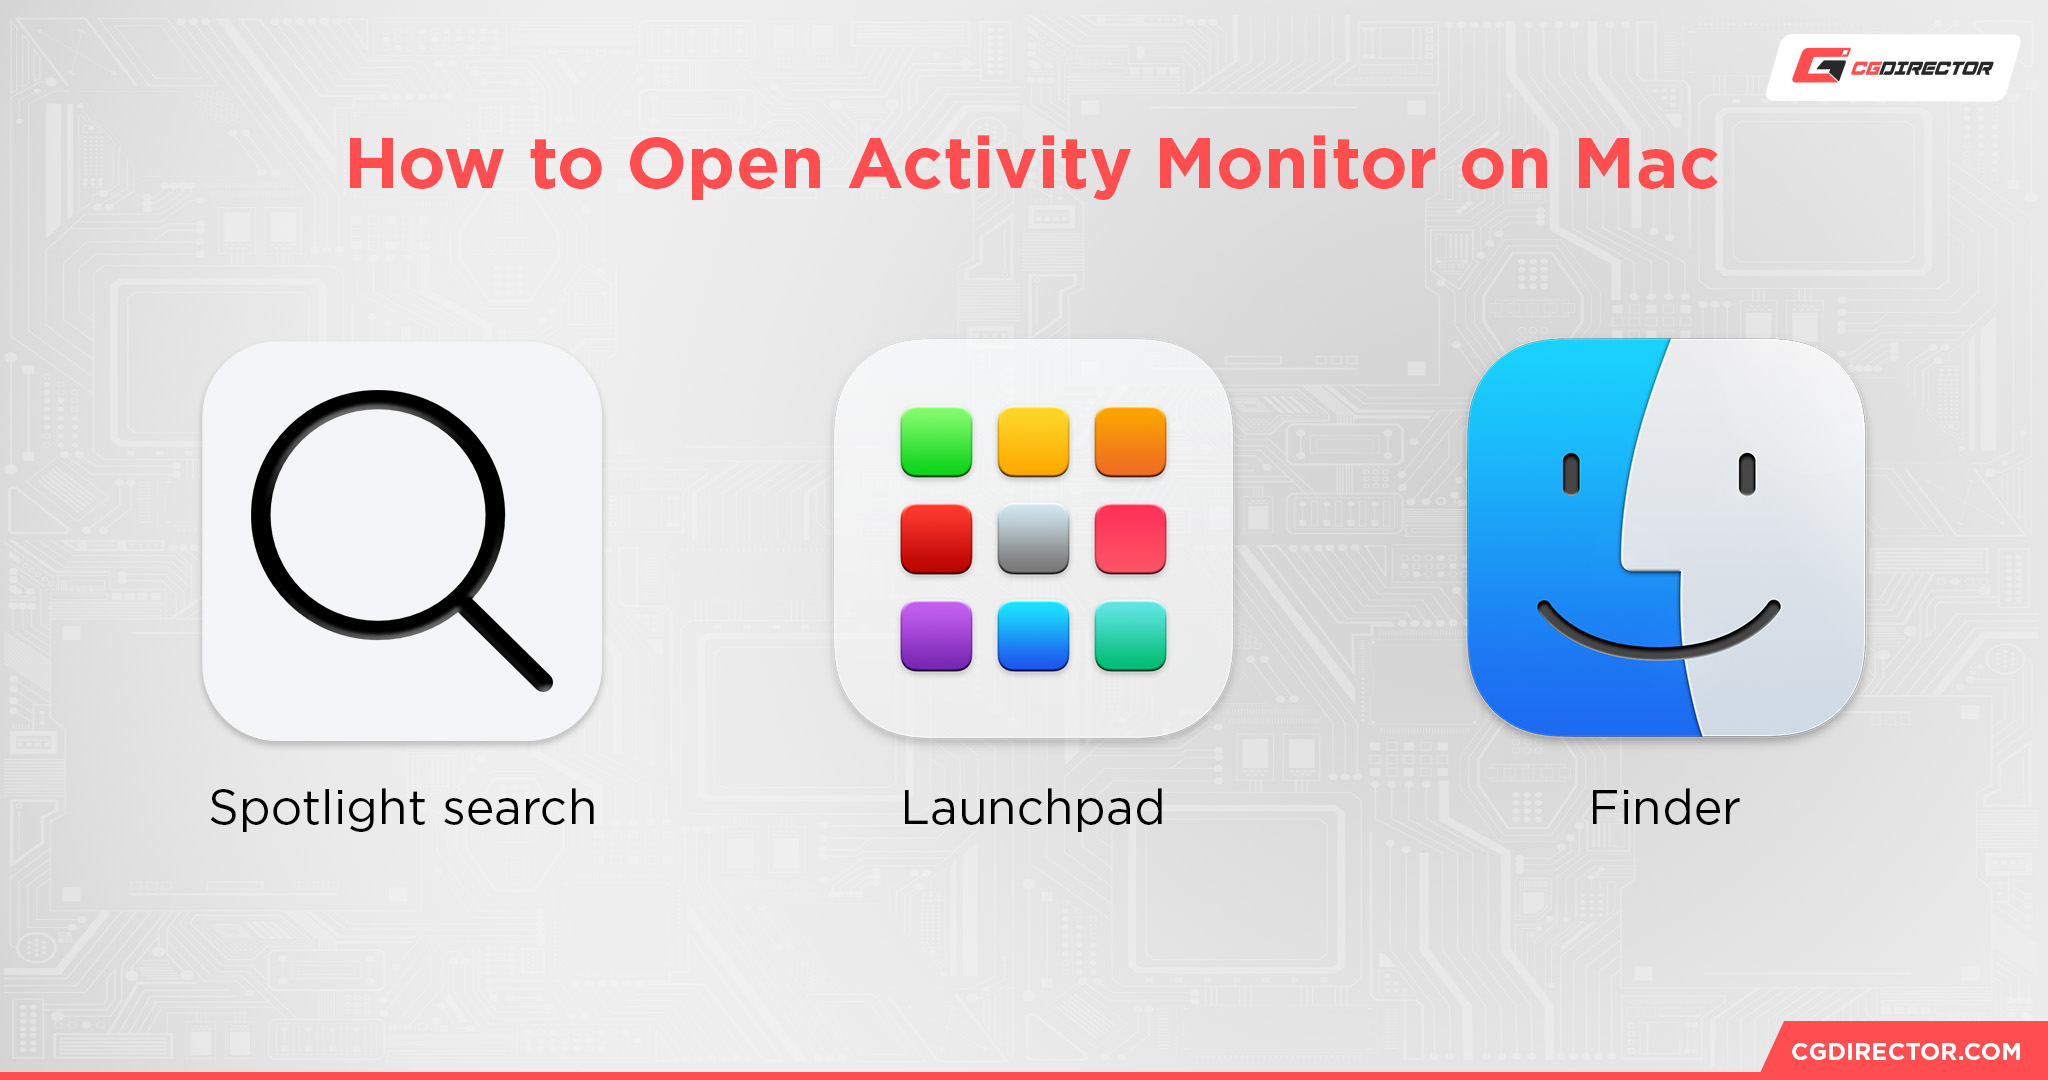 How to Open Activity Monitor on Mac